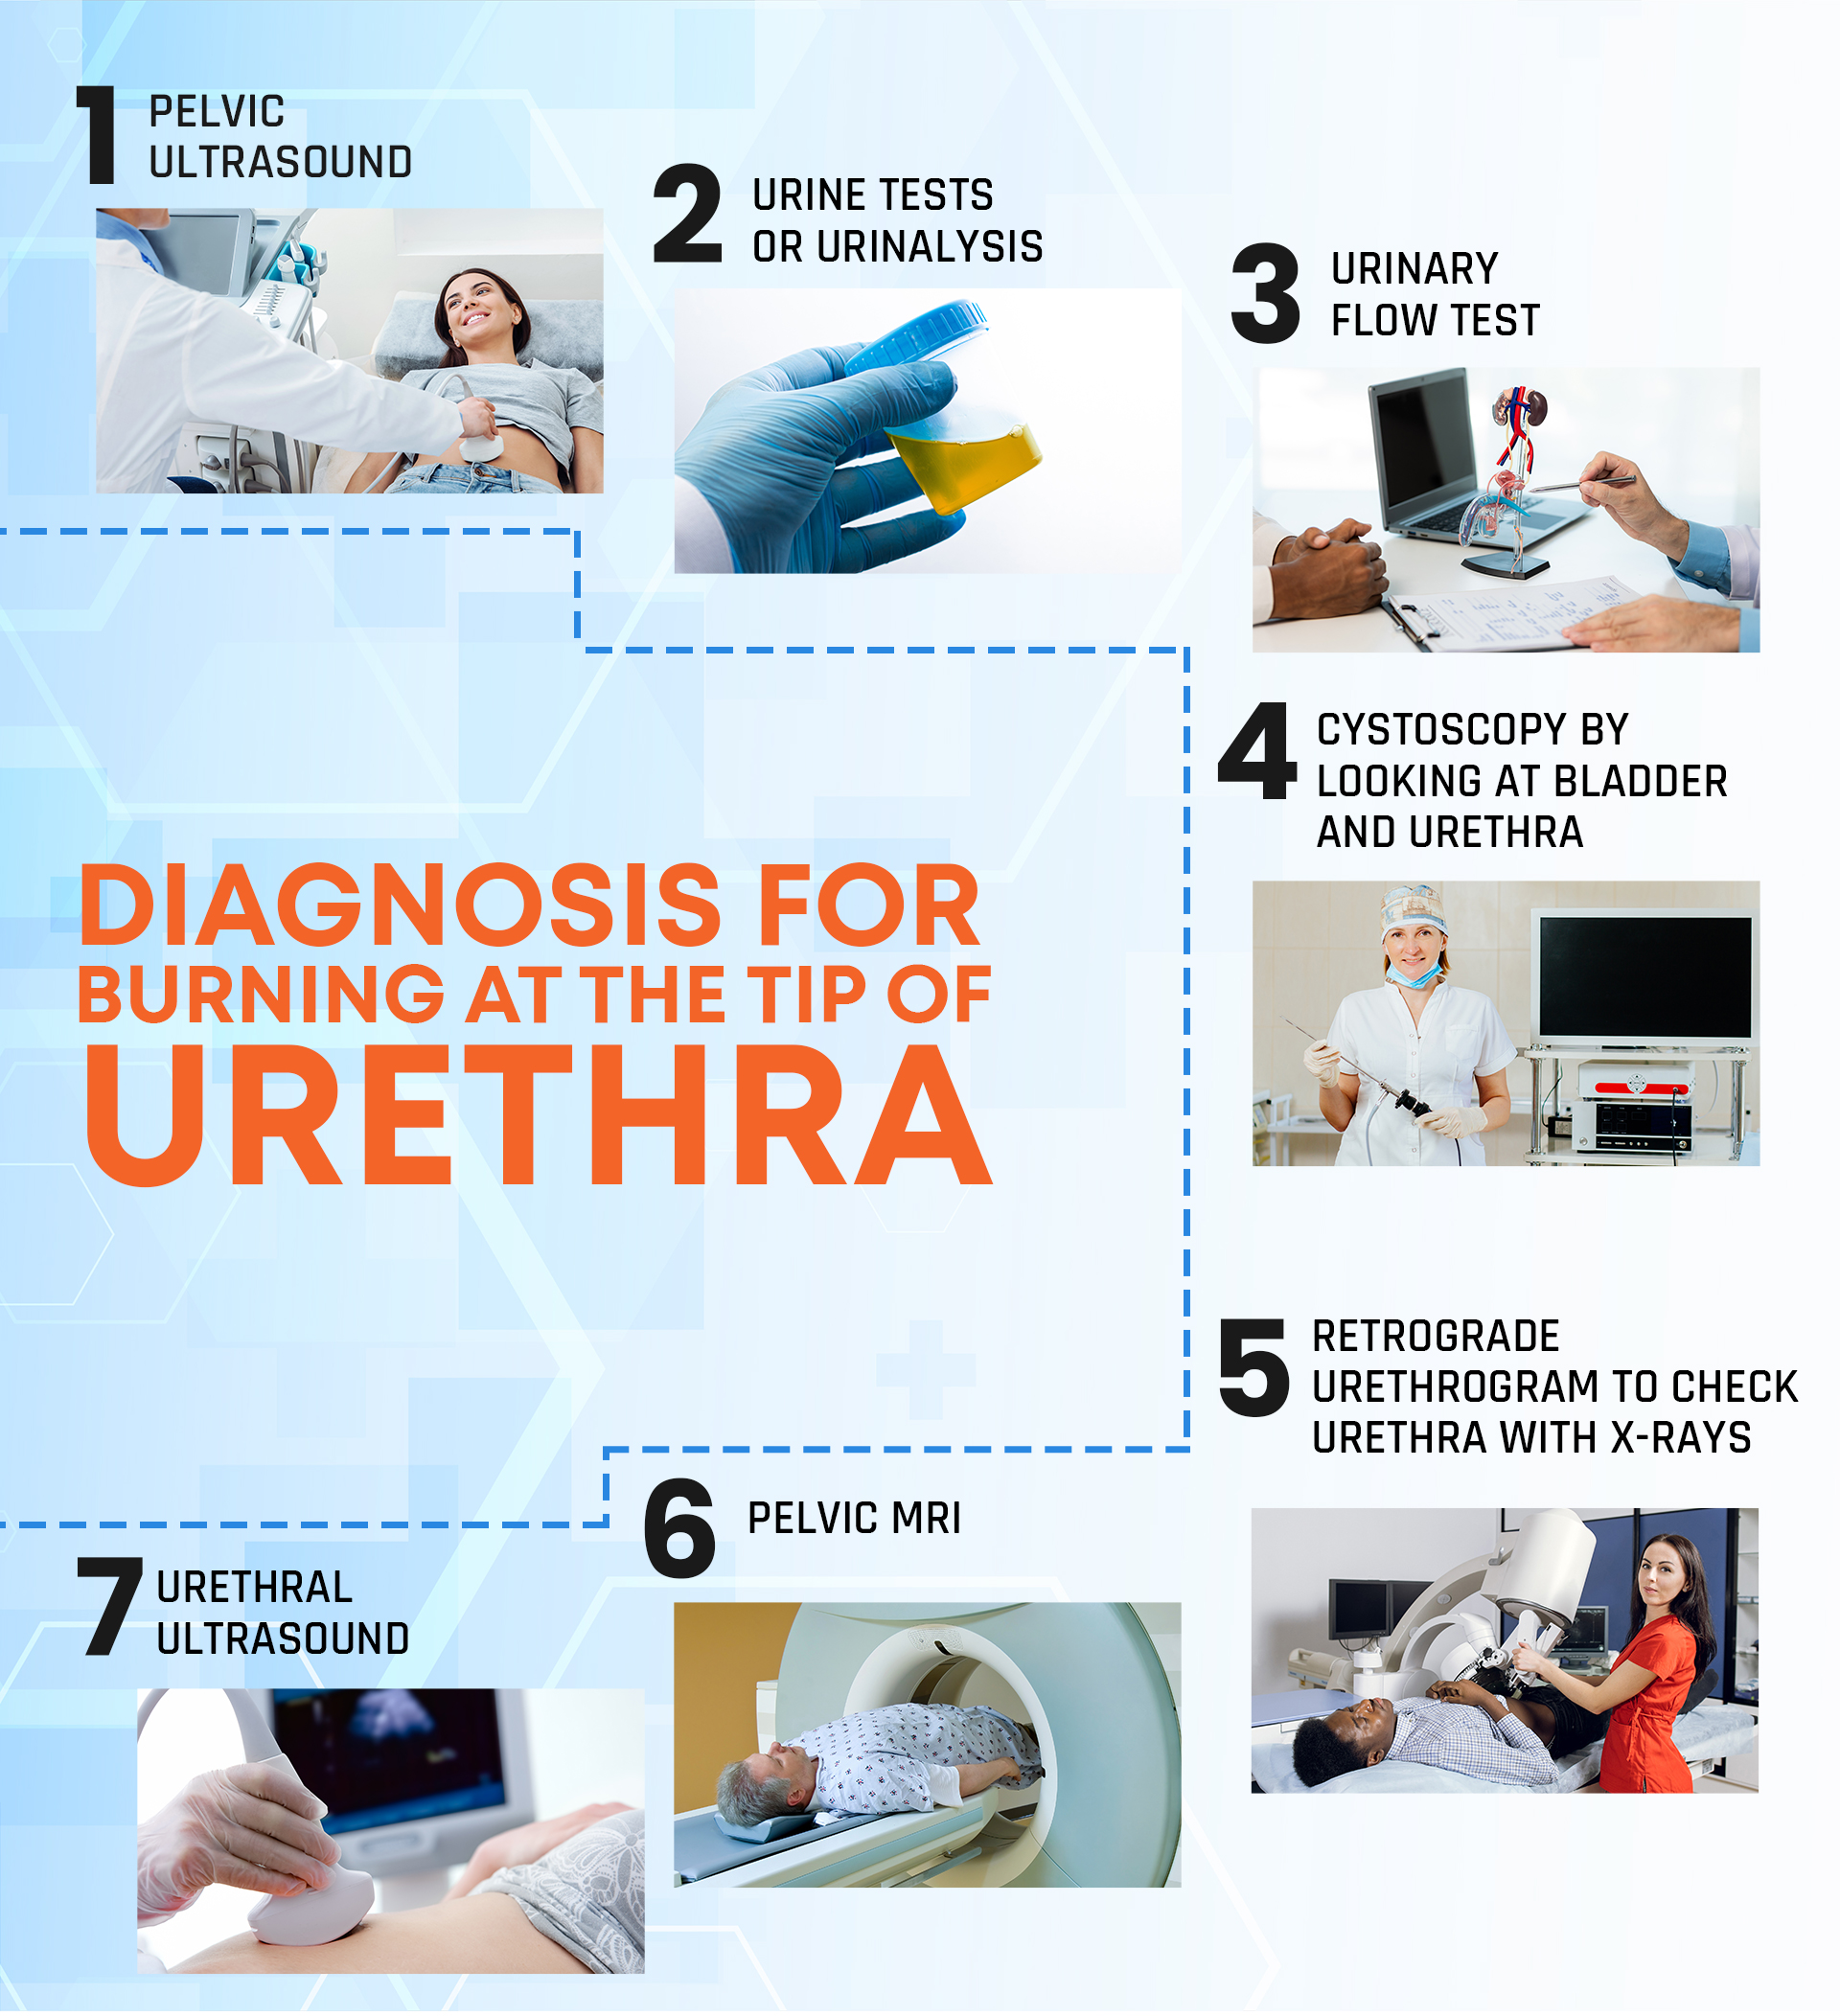 Diagnosis for Burning at the Tip of Urethra